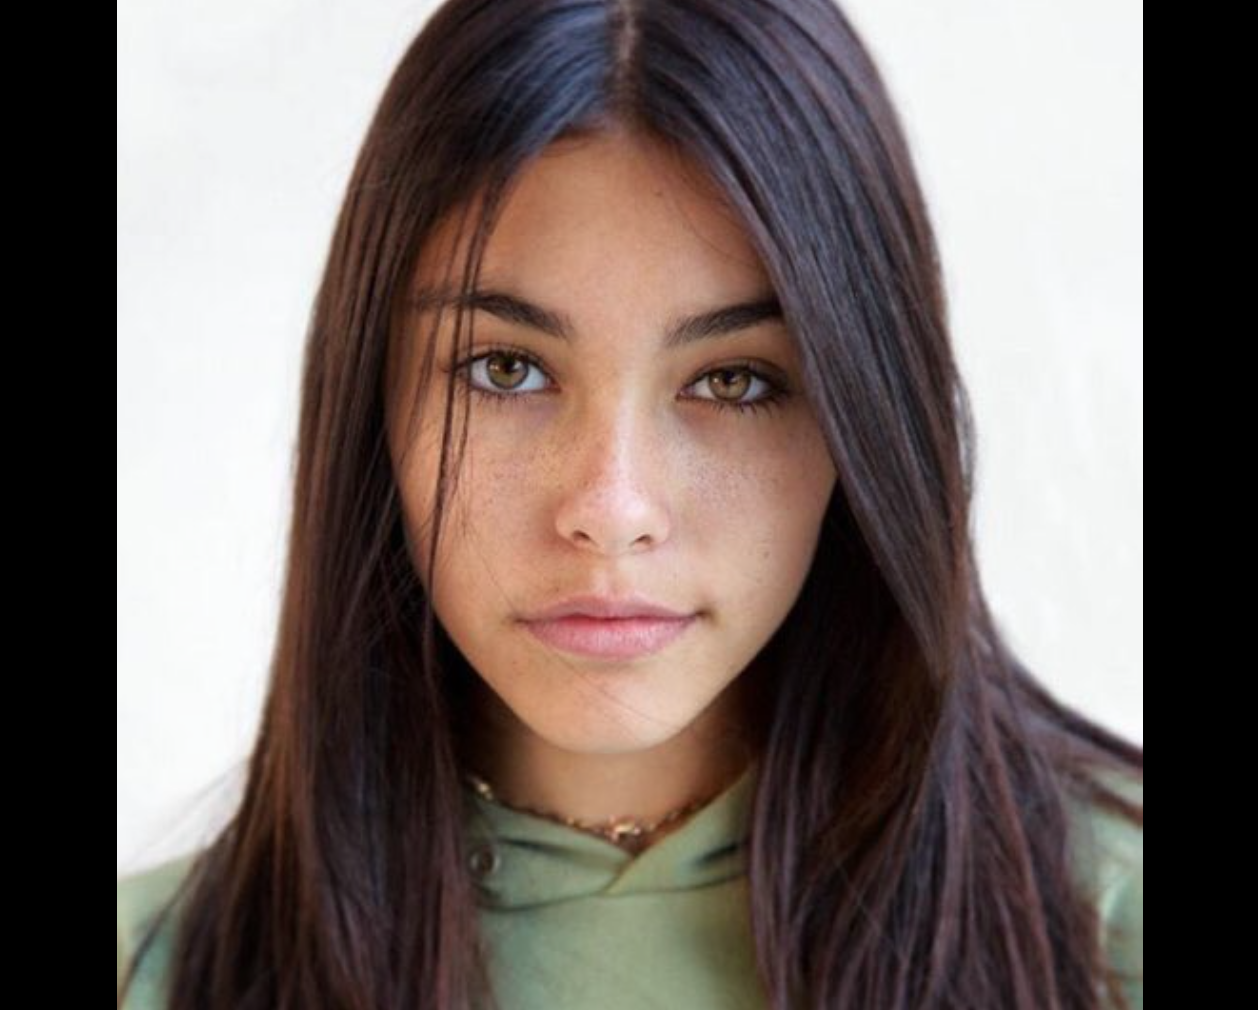 Madison Beer on Twitter: "'Madison is ugly without makeup' No honey is beautiful with and without makeup @MadisonBeer https://t.co/ynTyUKFbDu" / Twitter